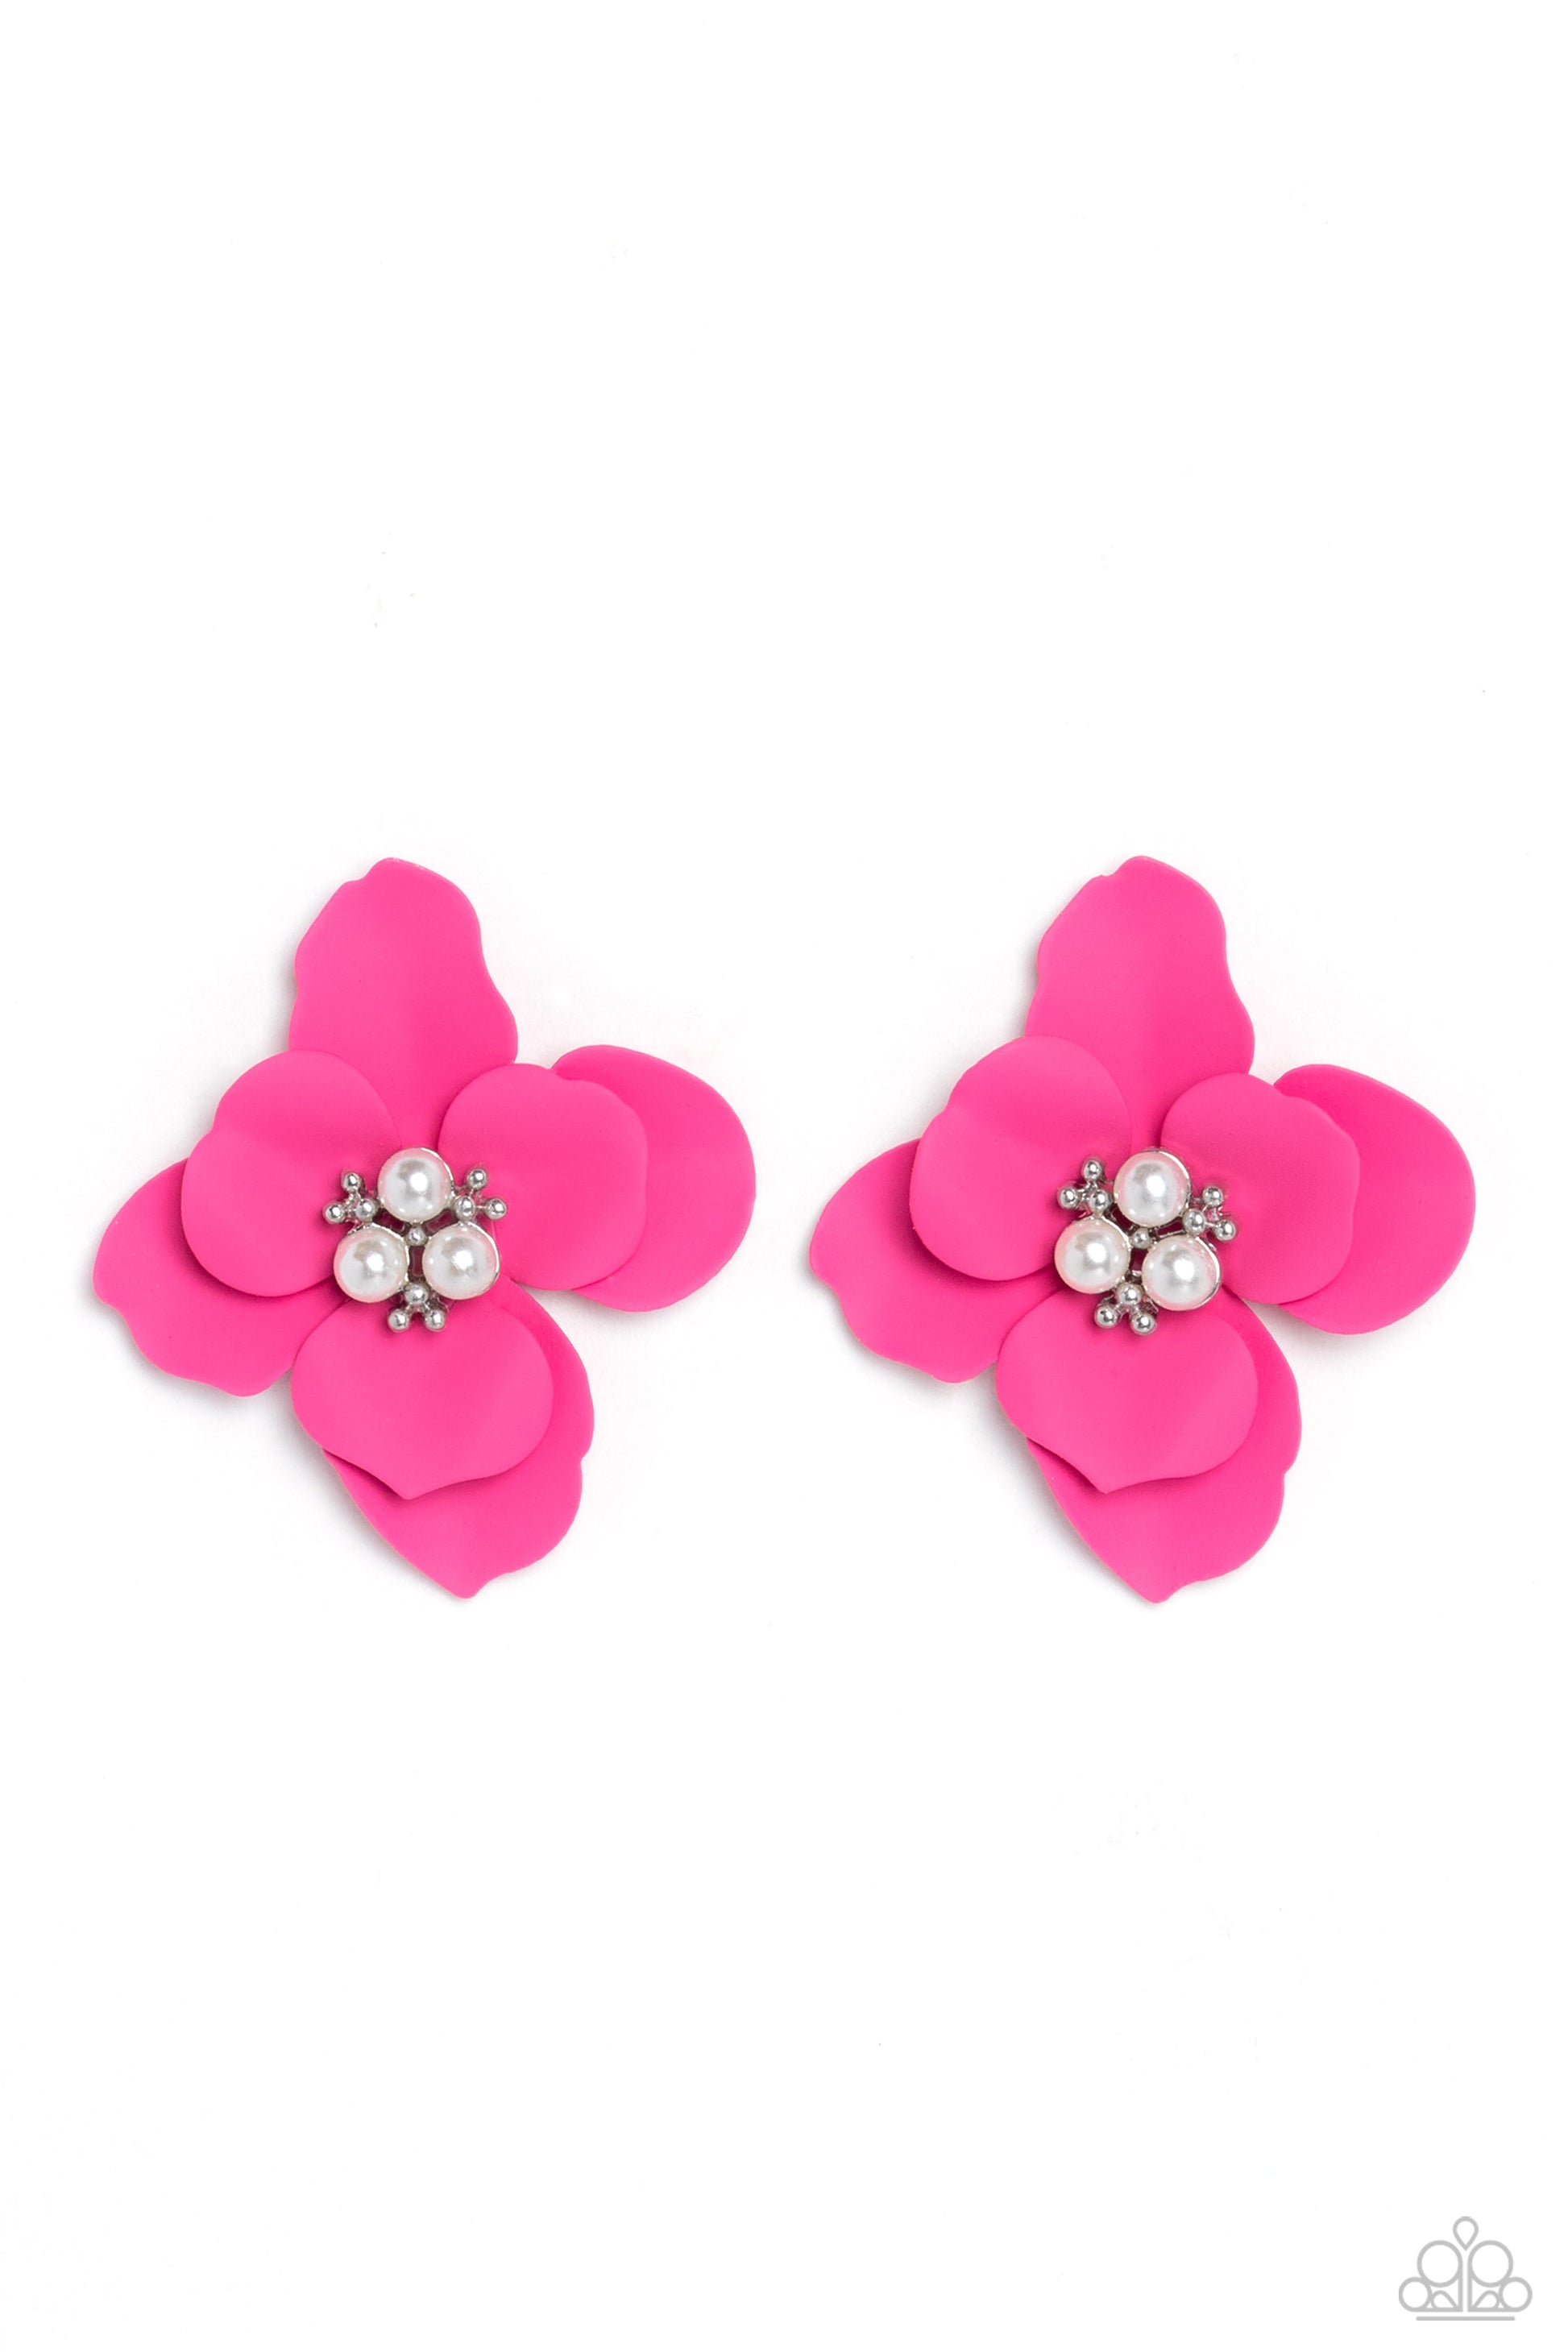 Paparazzi Accessories Jovial Jasmine - Pink Blooming from a dainty white pearl and studded center, hot pink petals flare out around the ear in a delicate, airy manner for a feminine finish. Earring attaches to a standard post fitting. Sold as one pair of